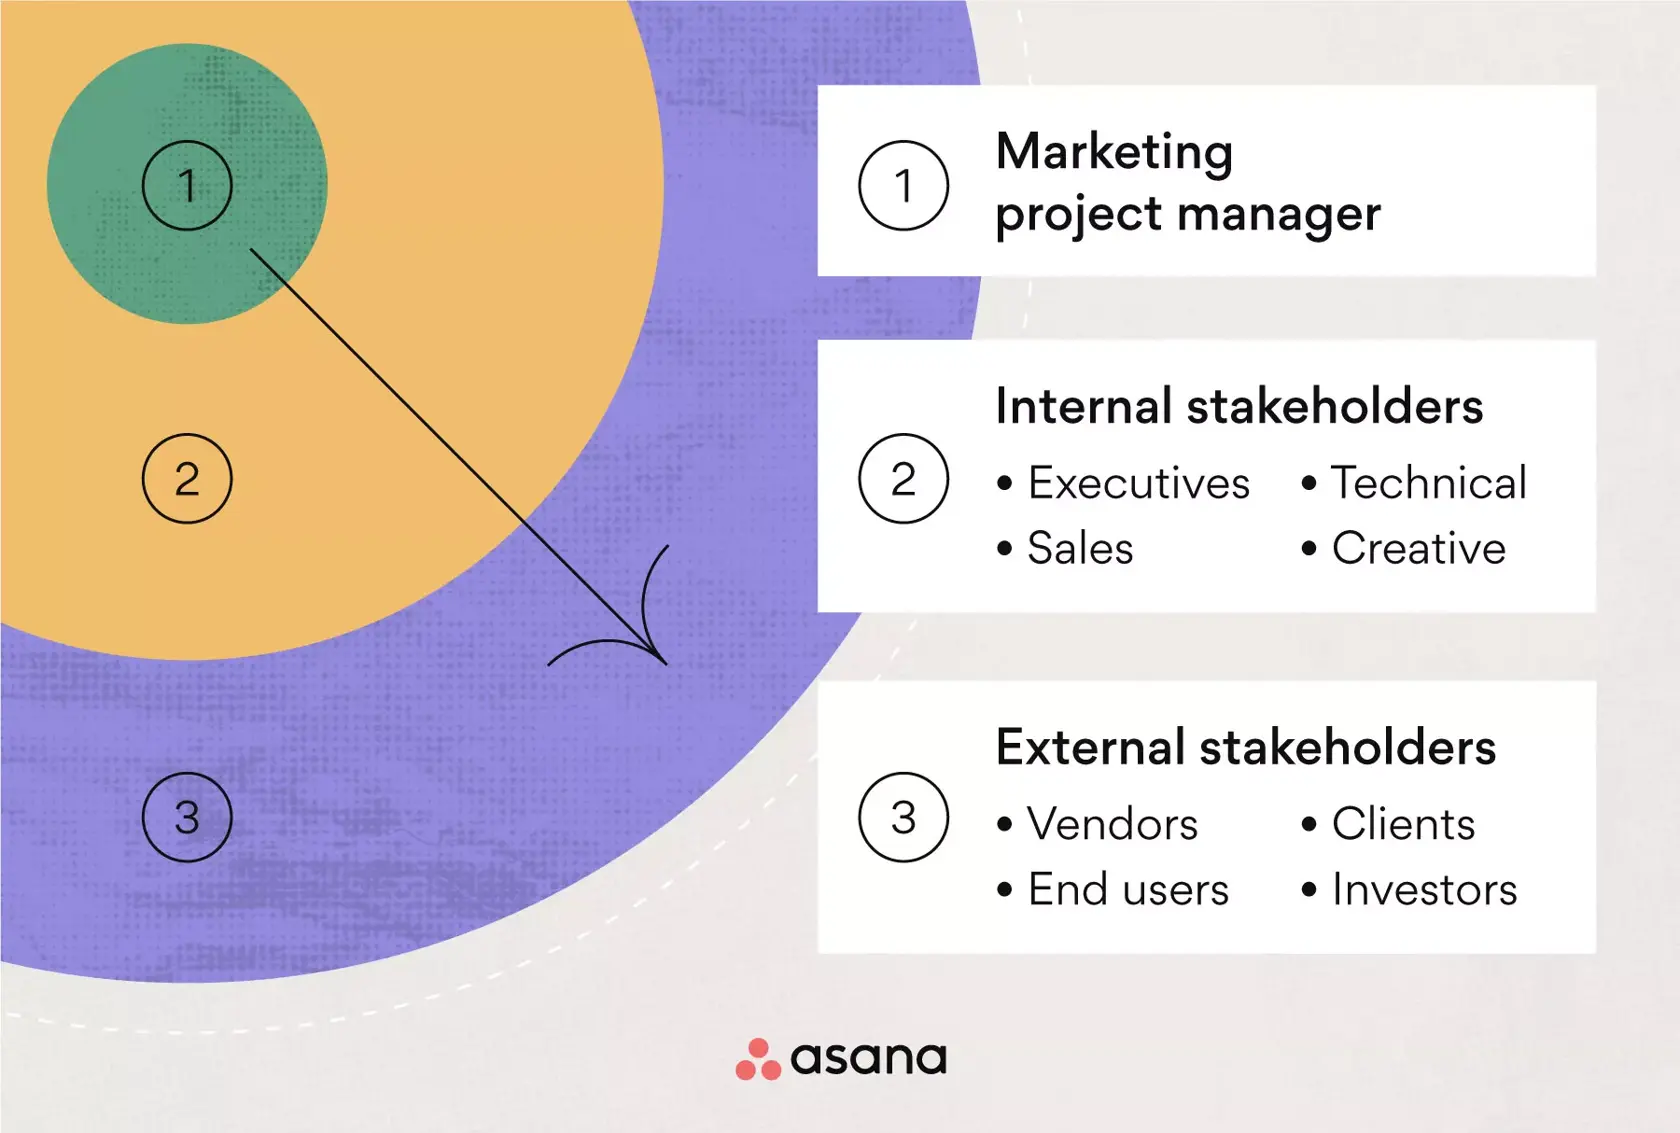 Why is marketing project management important?